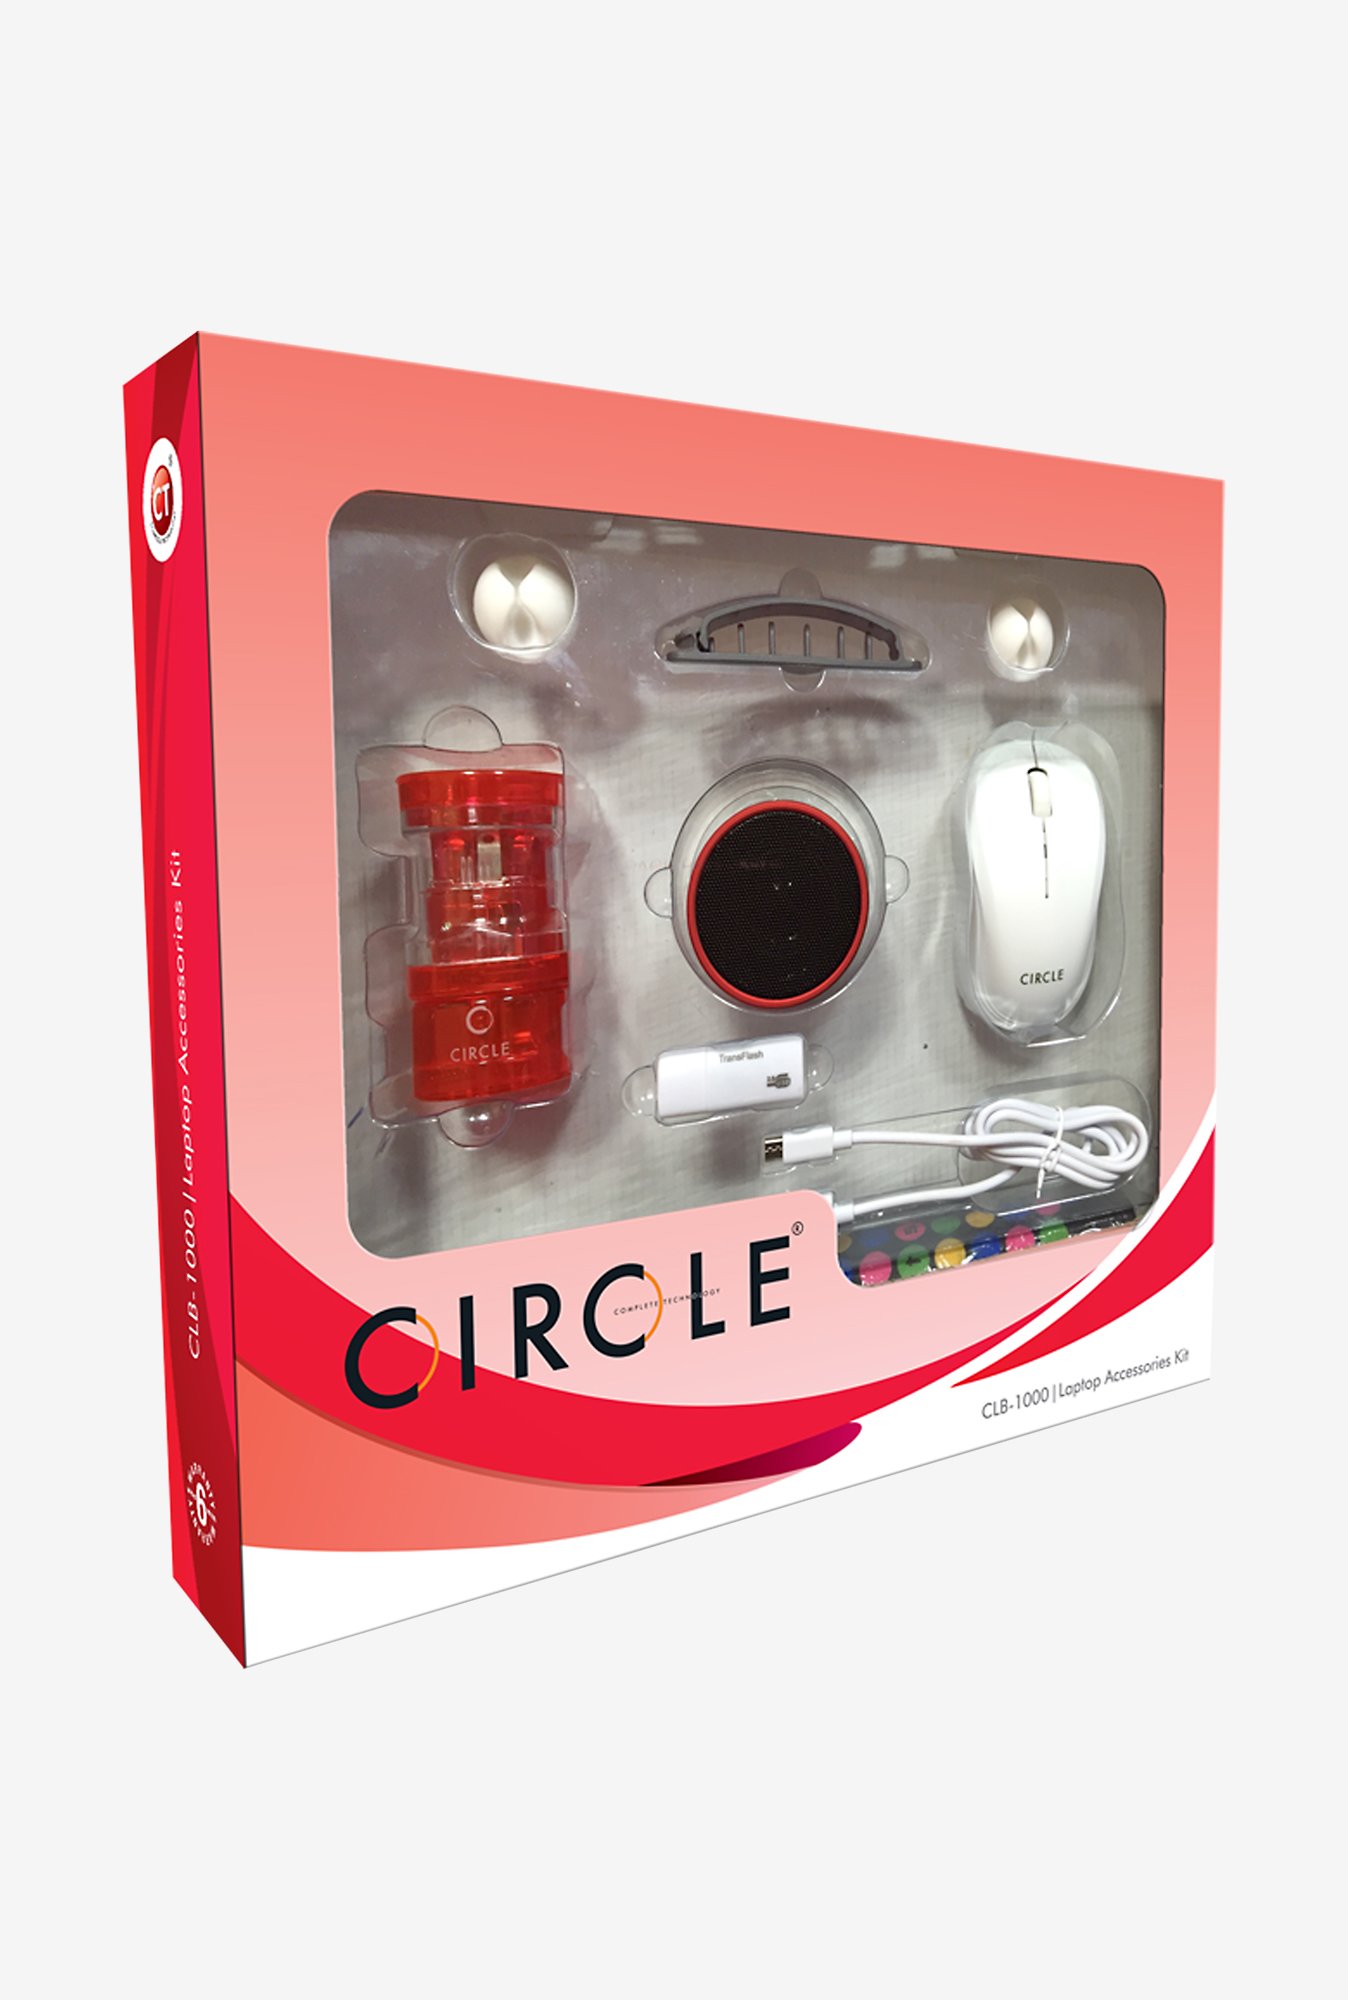 Buy Circle Clb 1000 Laptop Accessories Kit Online At Best Price At Tata Cliq